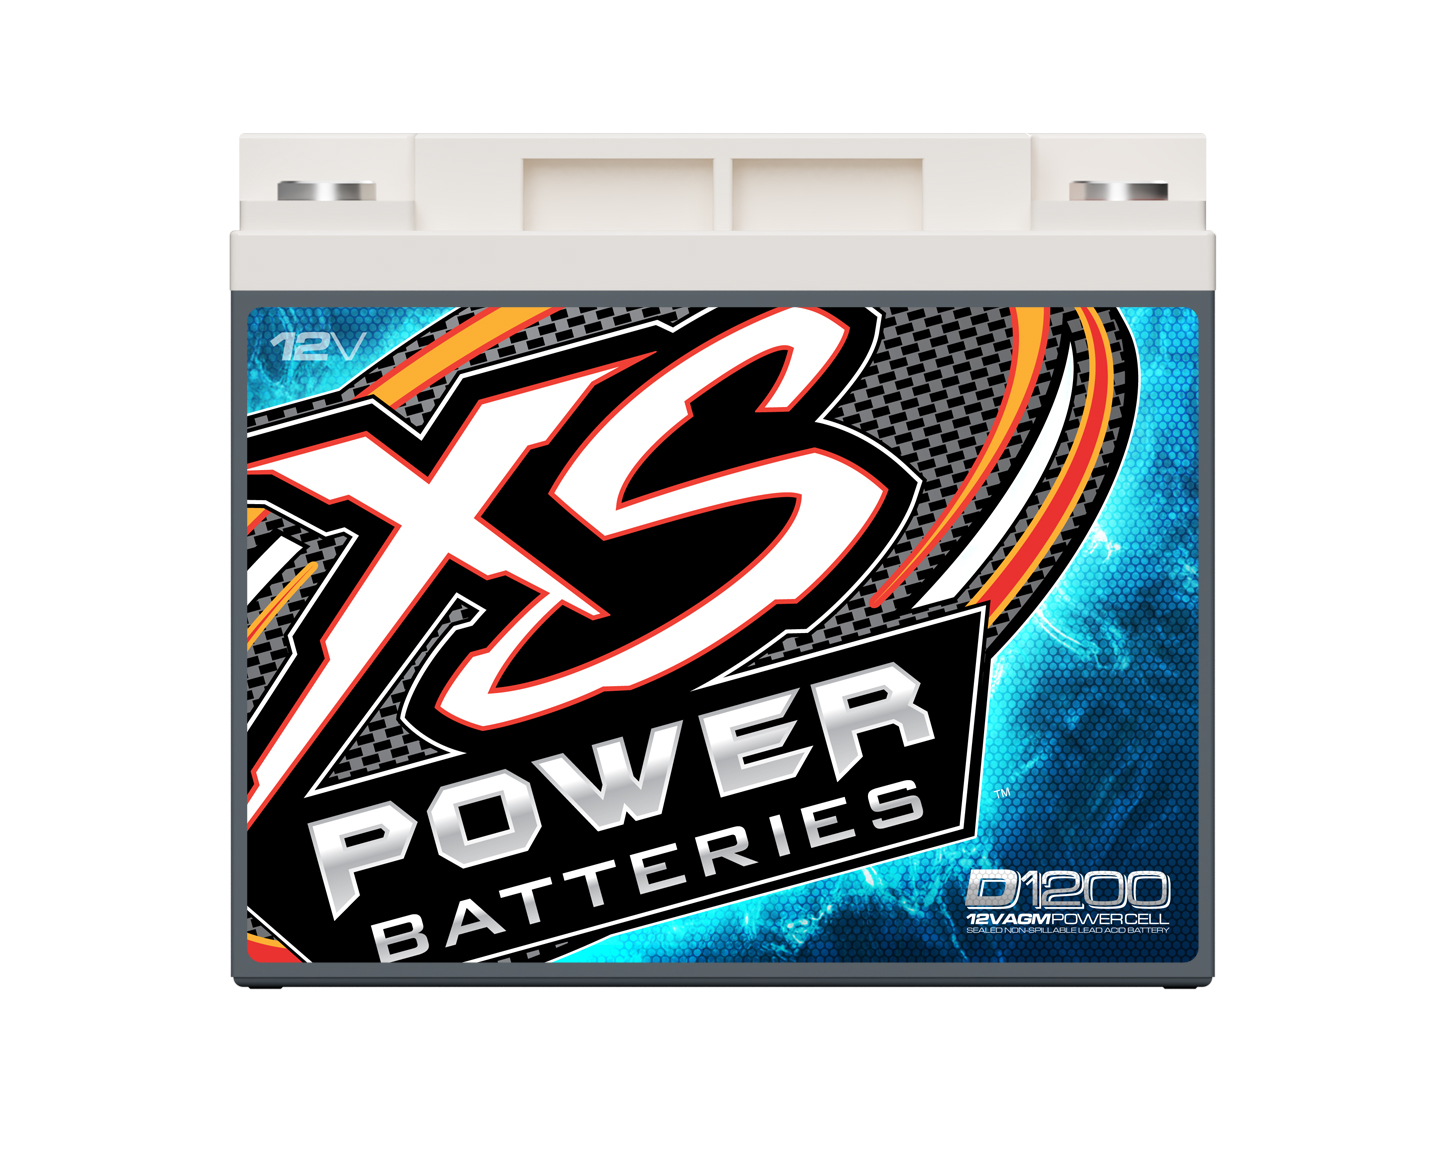 Which battery do I need for a 2005 dodge ram 1500 with 2 12 subs and 3000 way amp